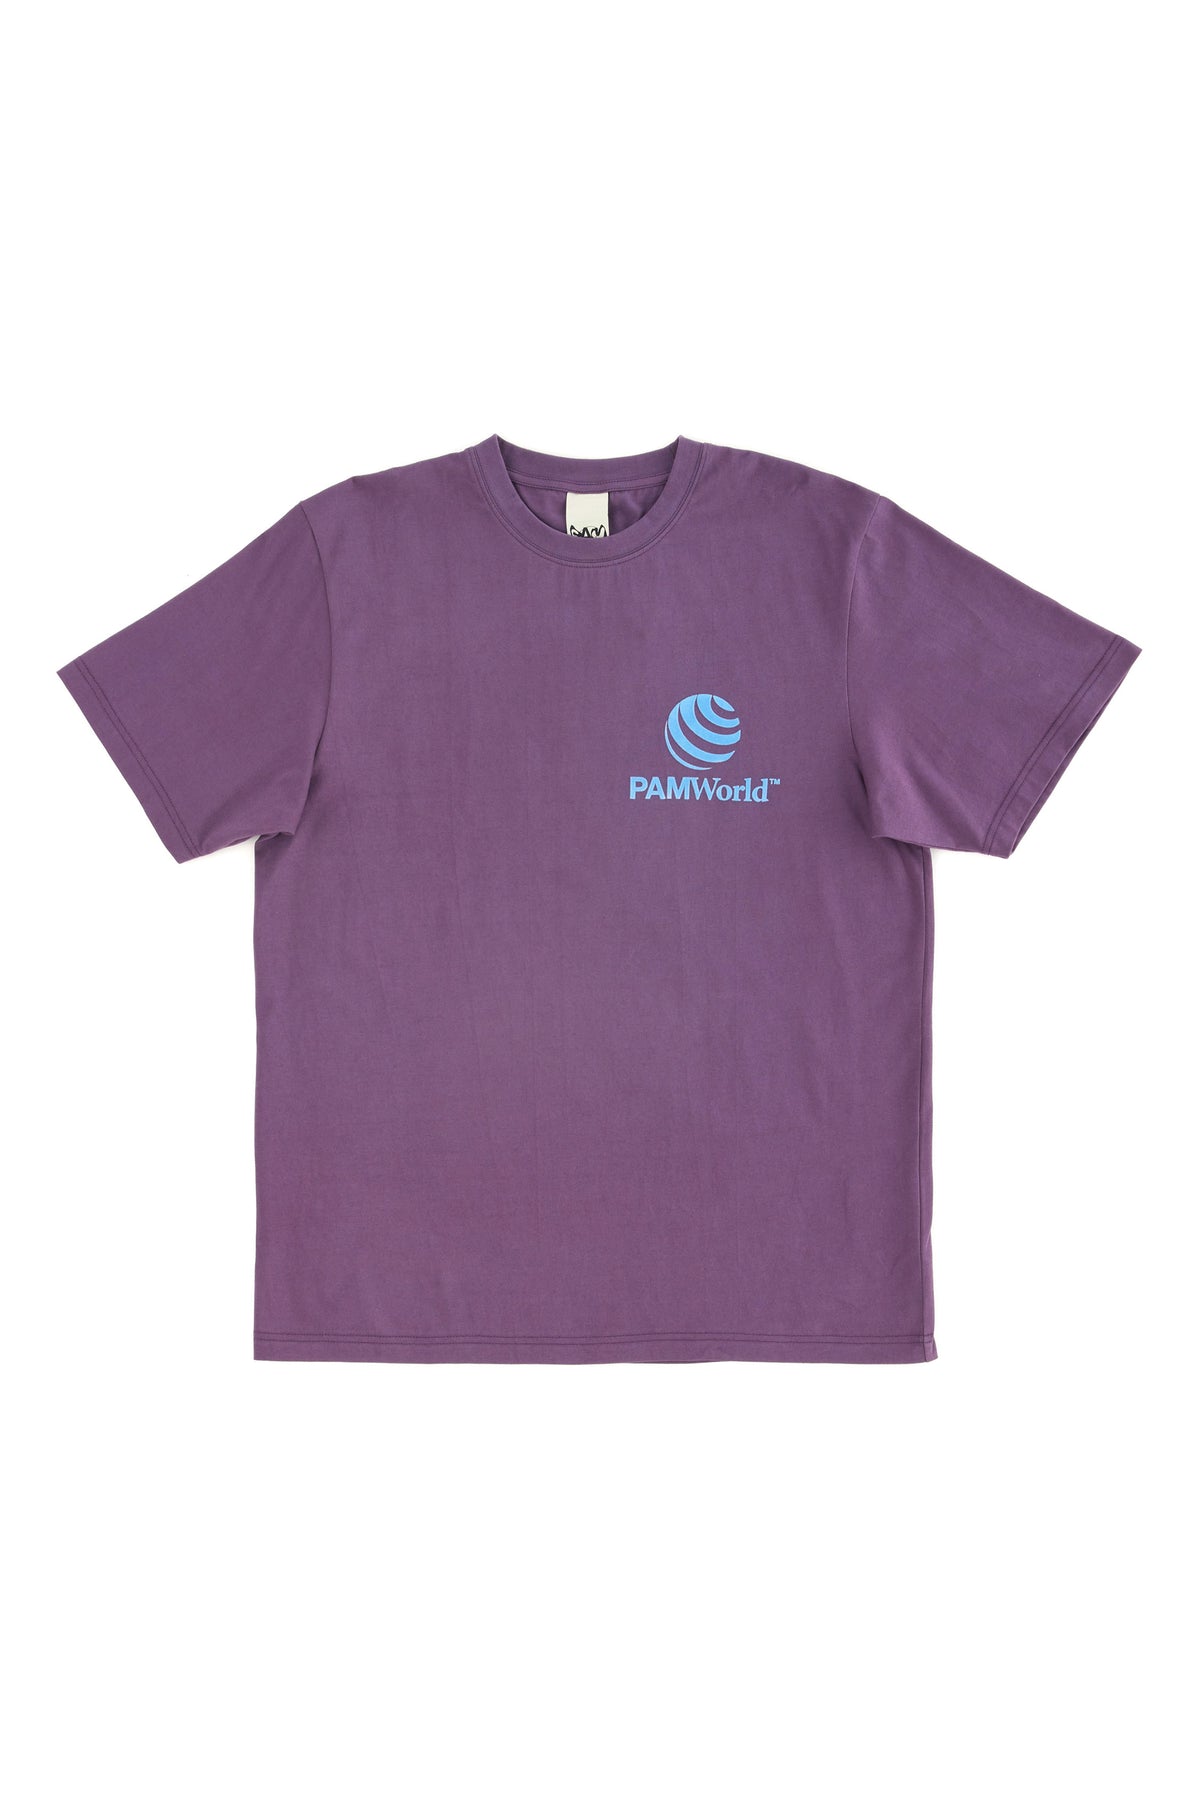 P.A.M. P. World Tee - Mulberry